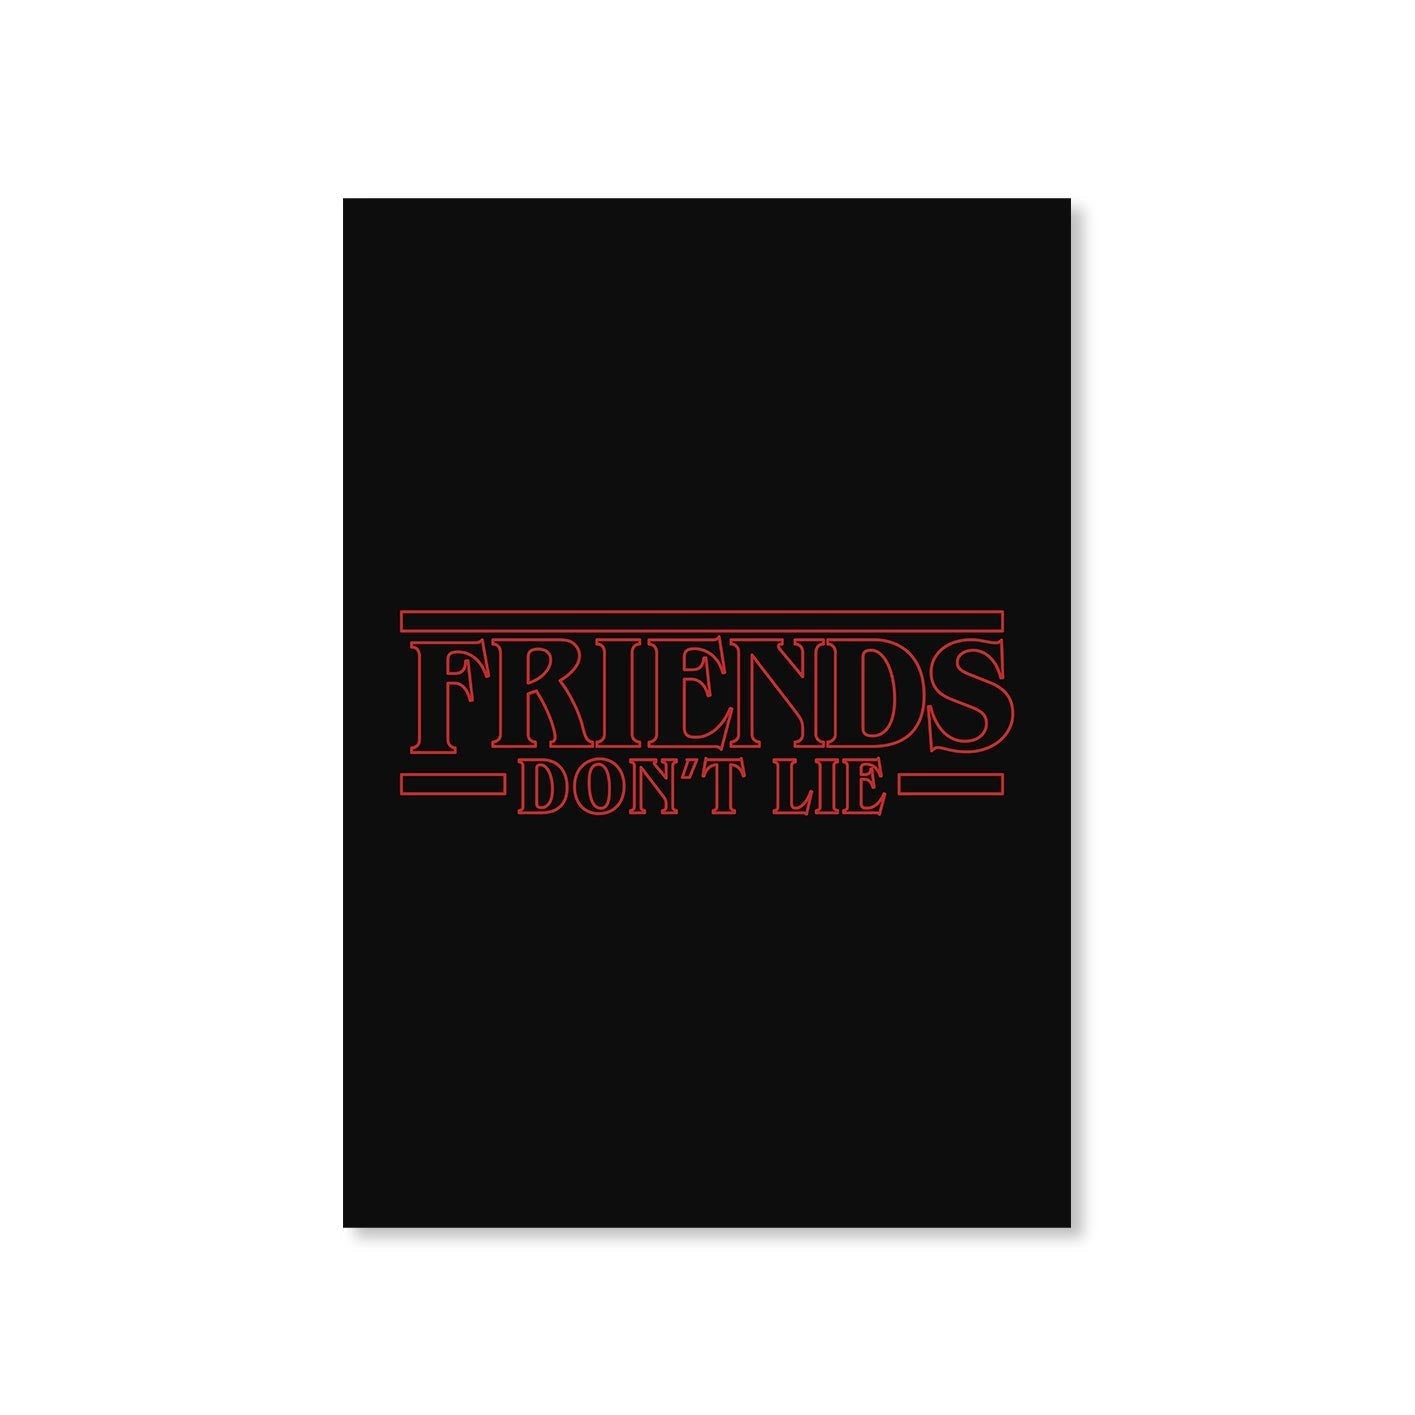 stranger things friends don't lie poster wall art buy online india the banyan tee tbt a4 stranger things eleven demogorgon shadow monster dustin quote vector art clothing accessories merchandise